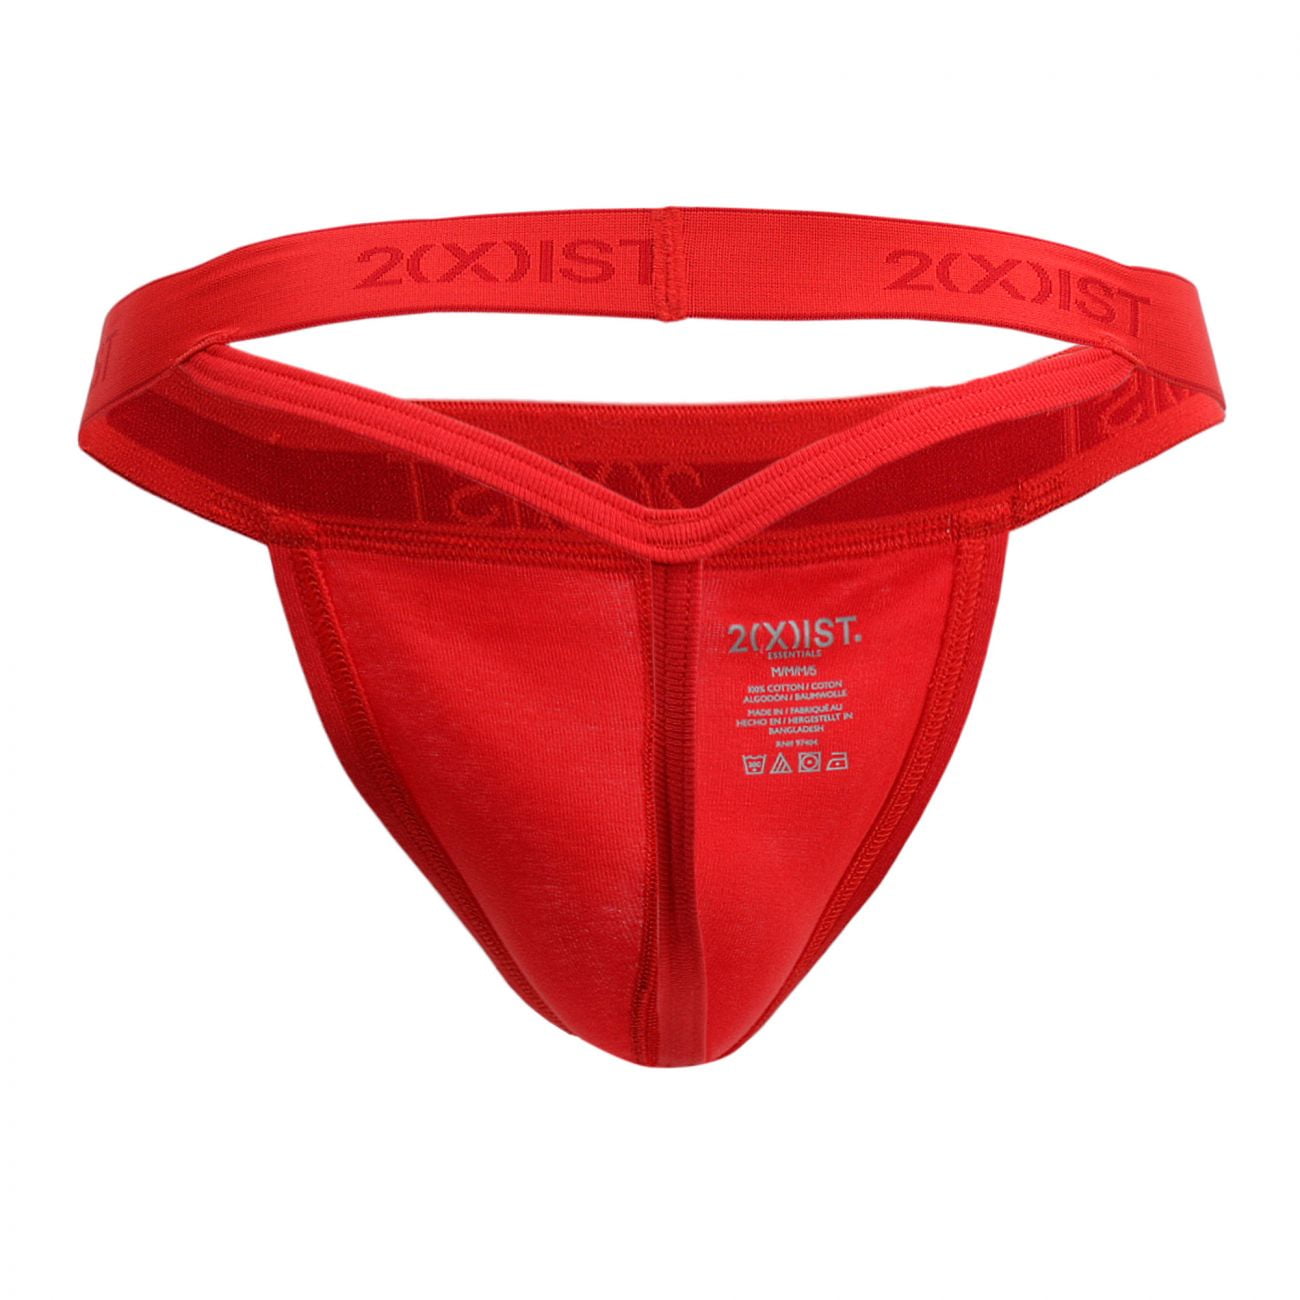 2one2 apparel - Our Fupa compression thong is available in sizes